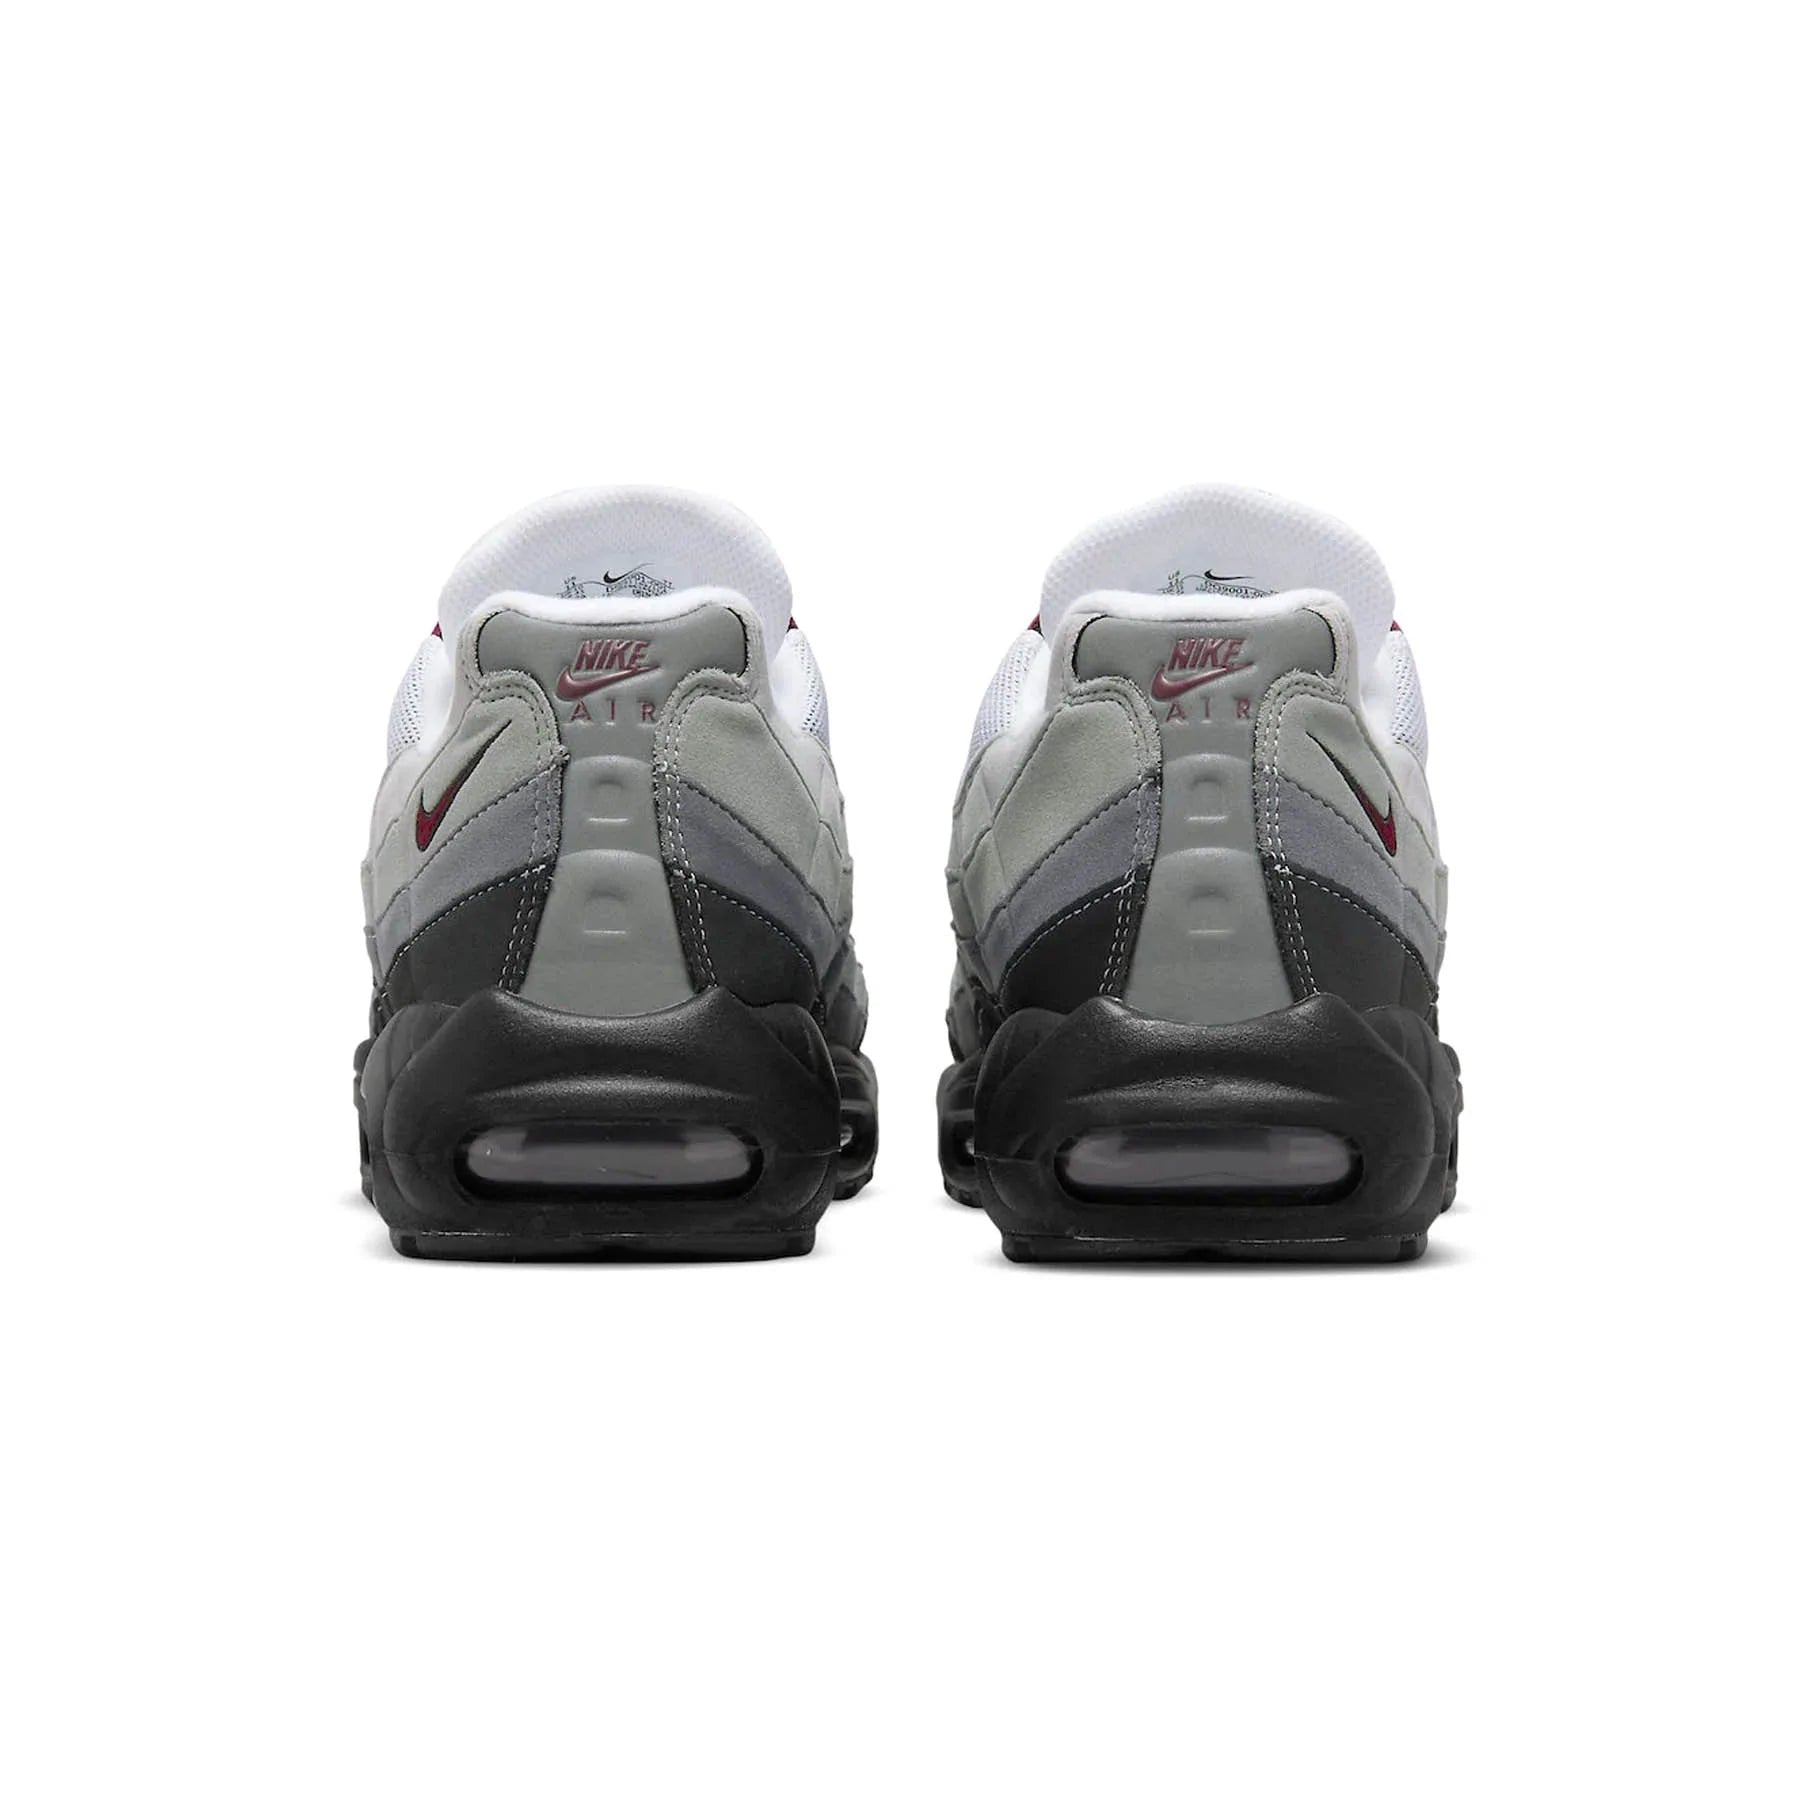 Double Boxed  274.99 Nike Air Max 95 Beetroot Double Boxed